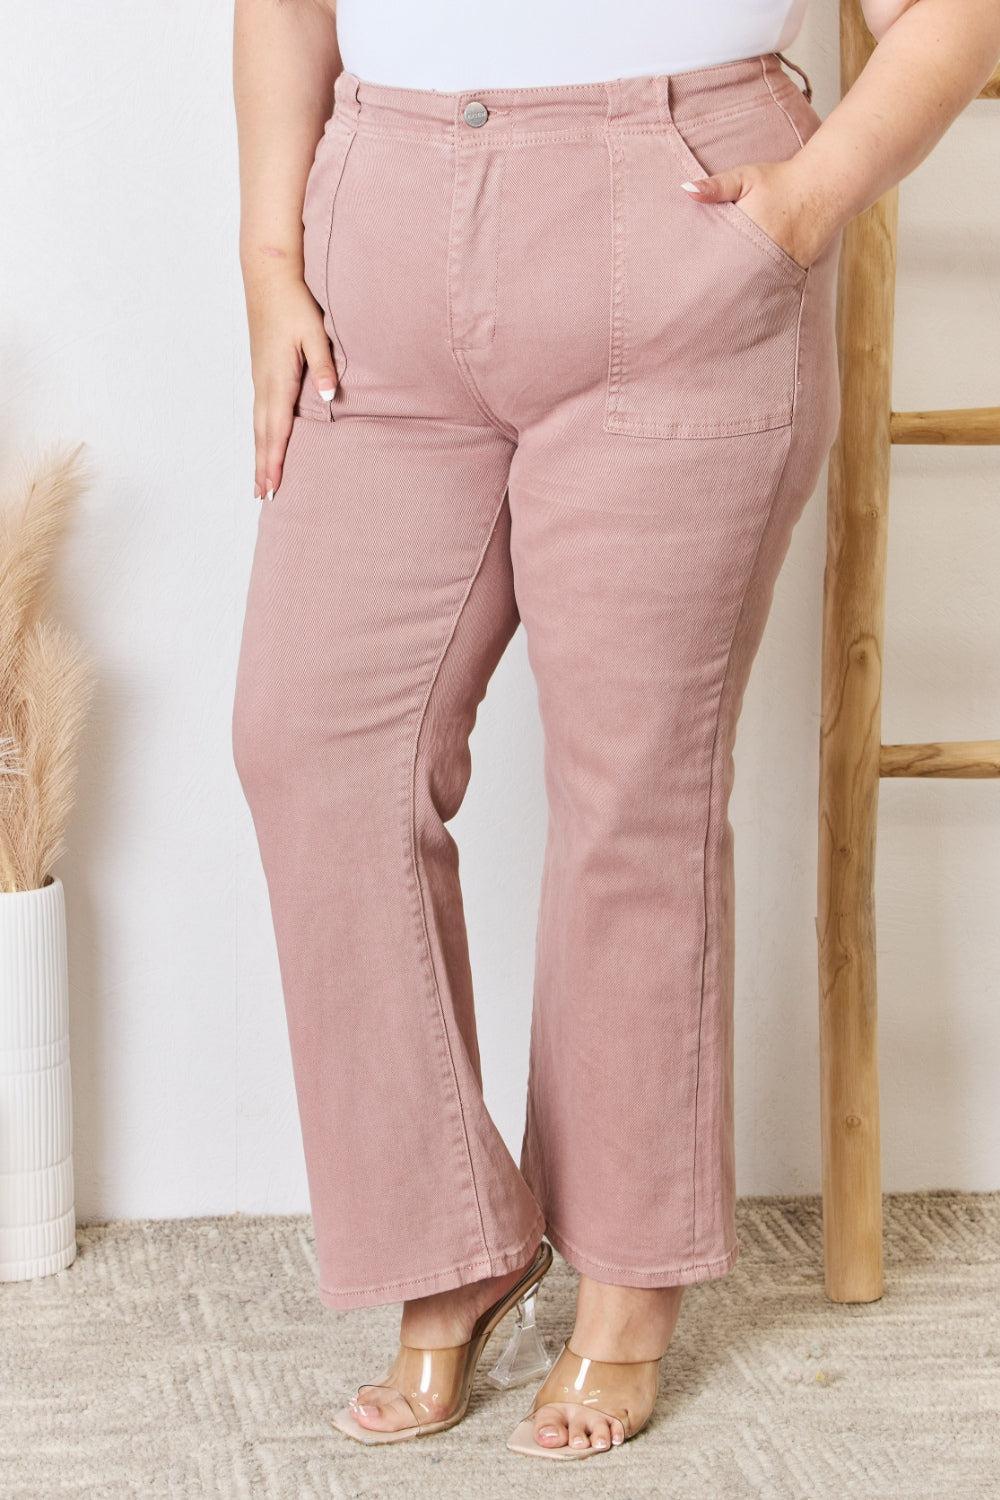 a woman in a white top and pink pants